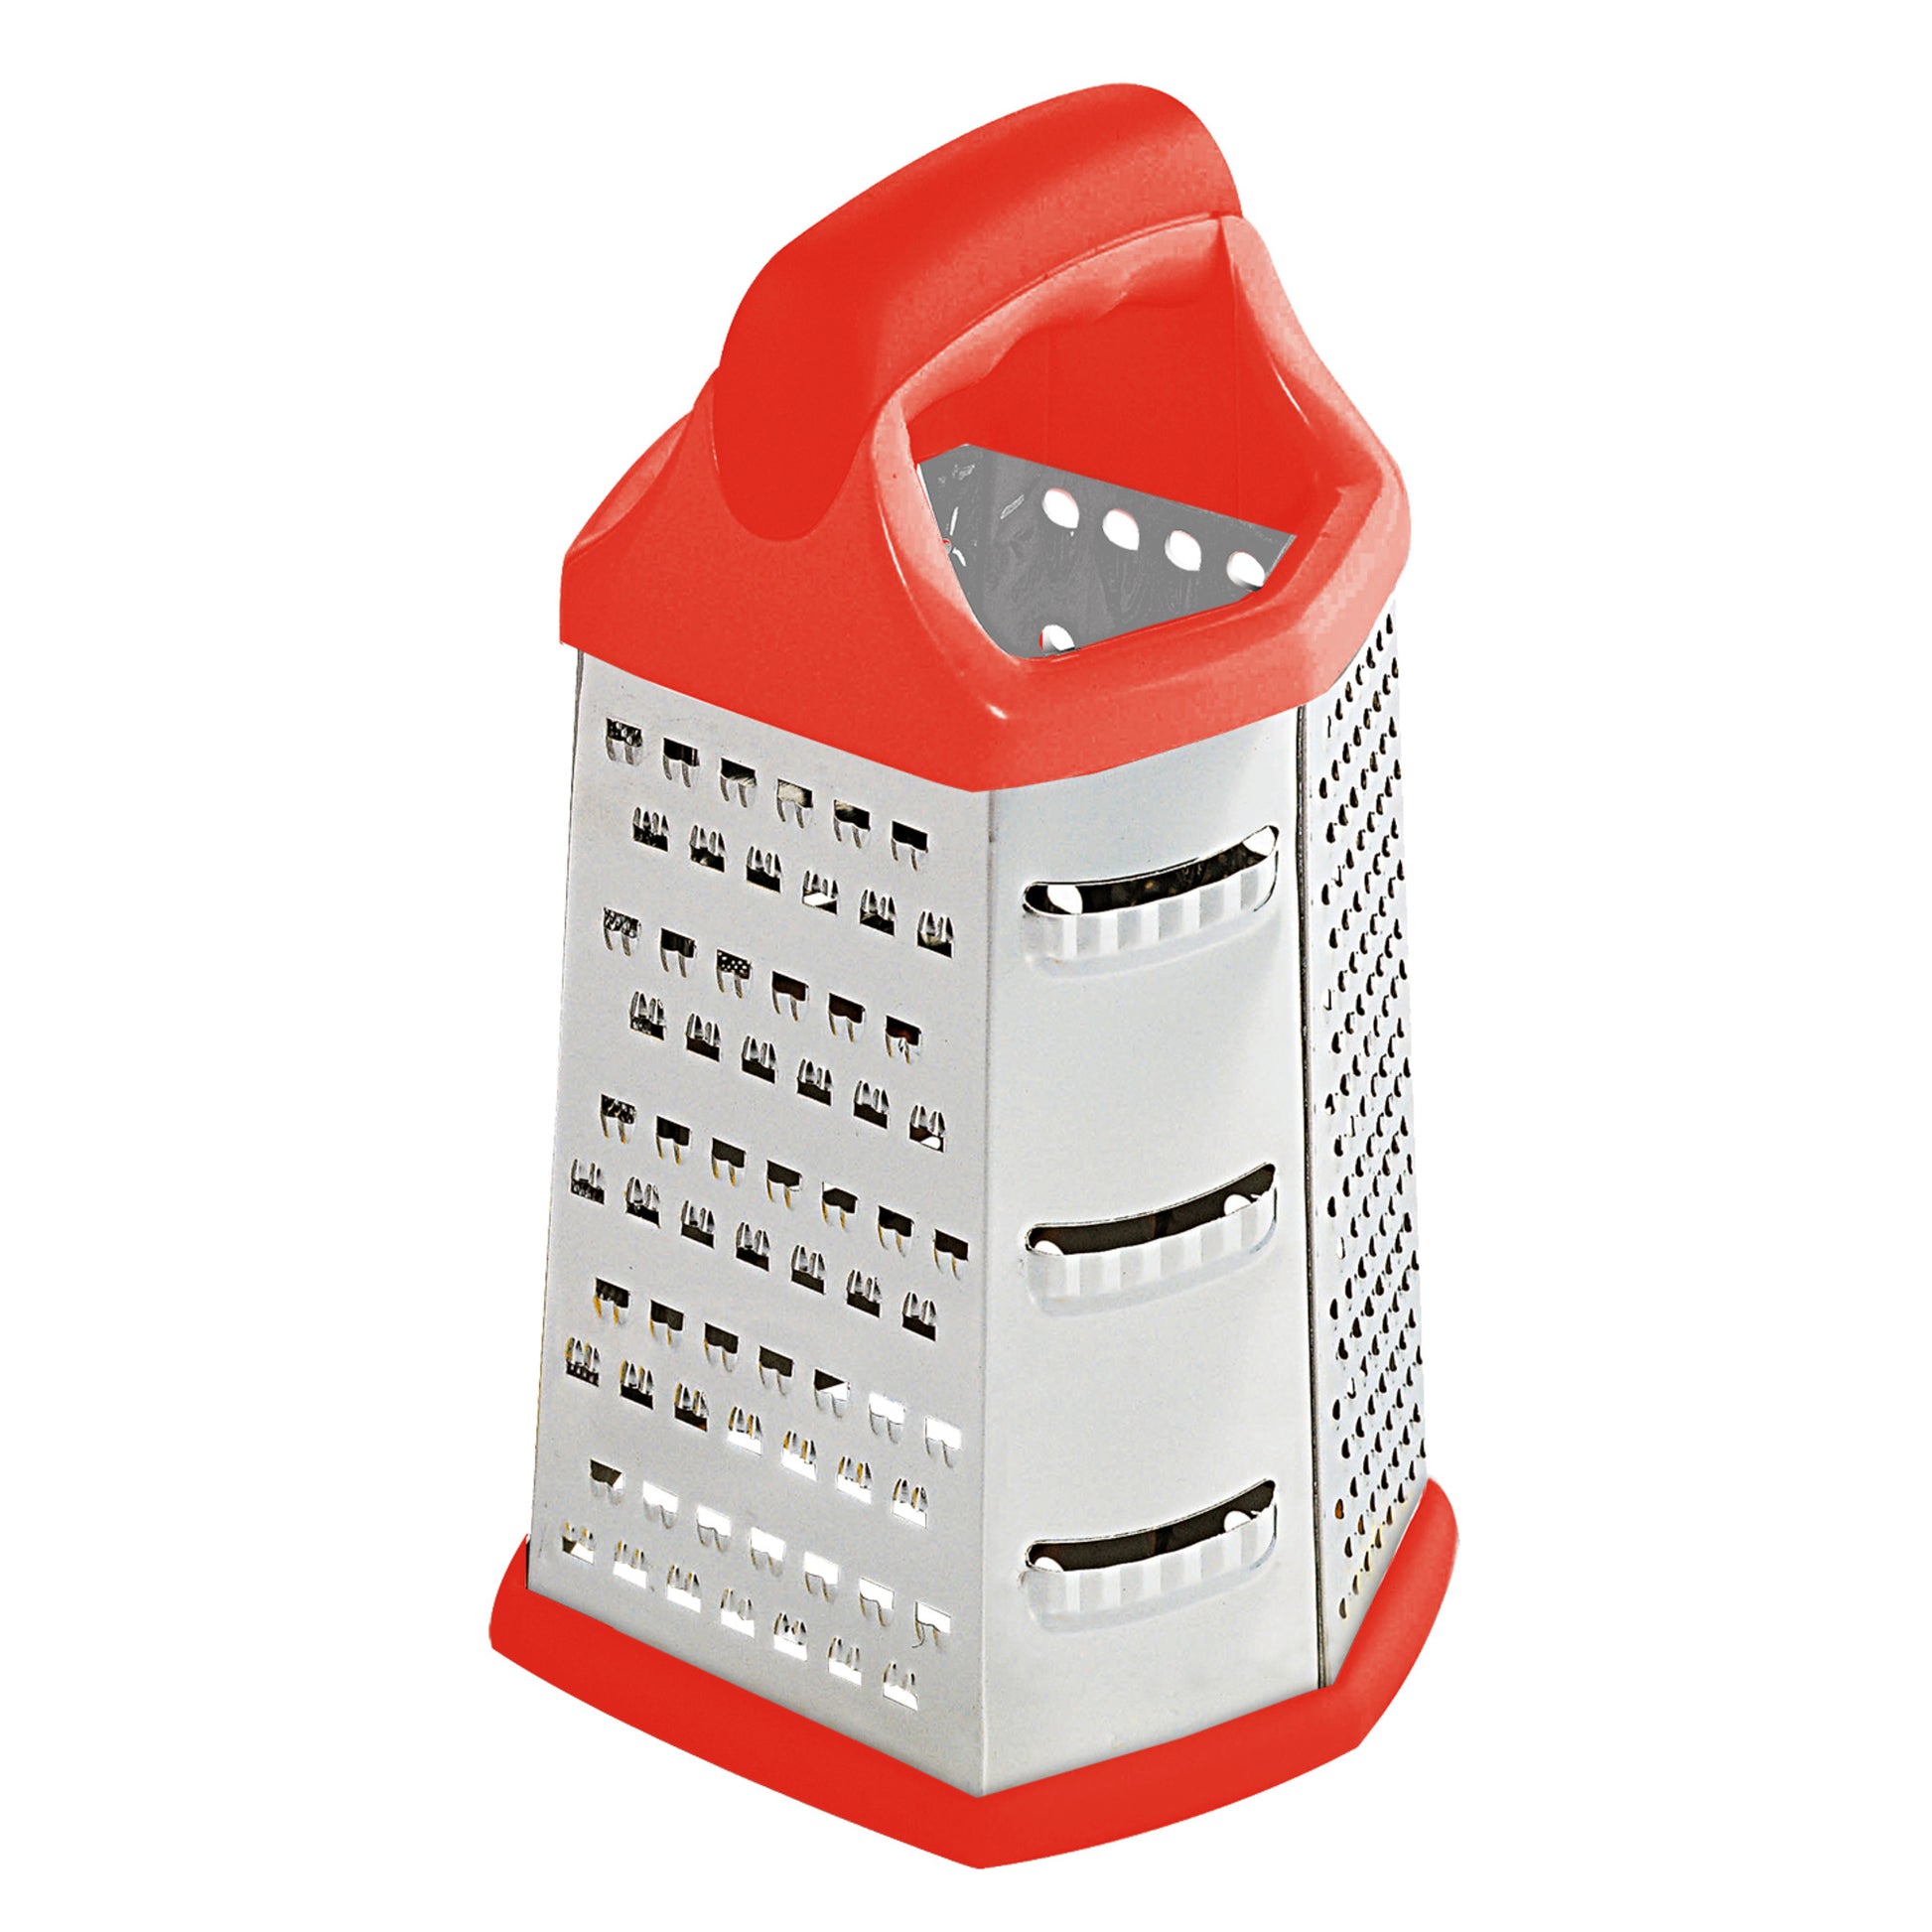 Home Basics 6 Sided Stainless Steel Cheese Grater - Red